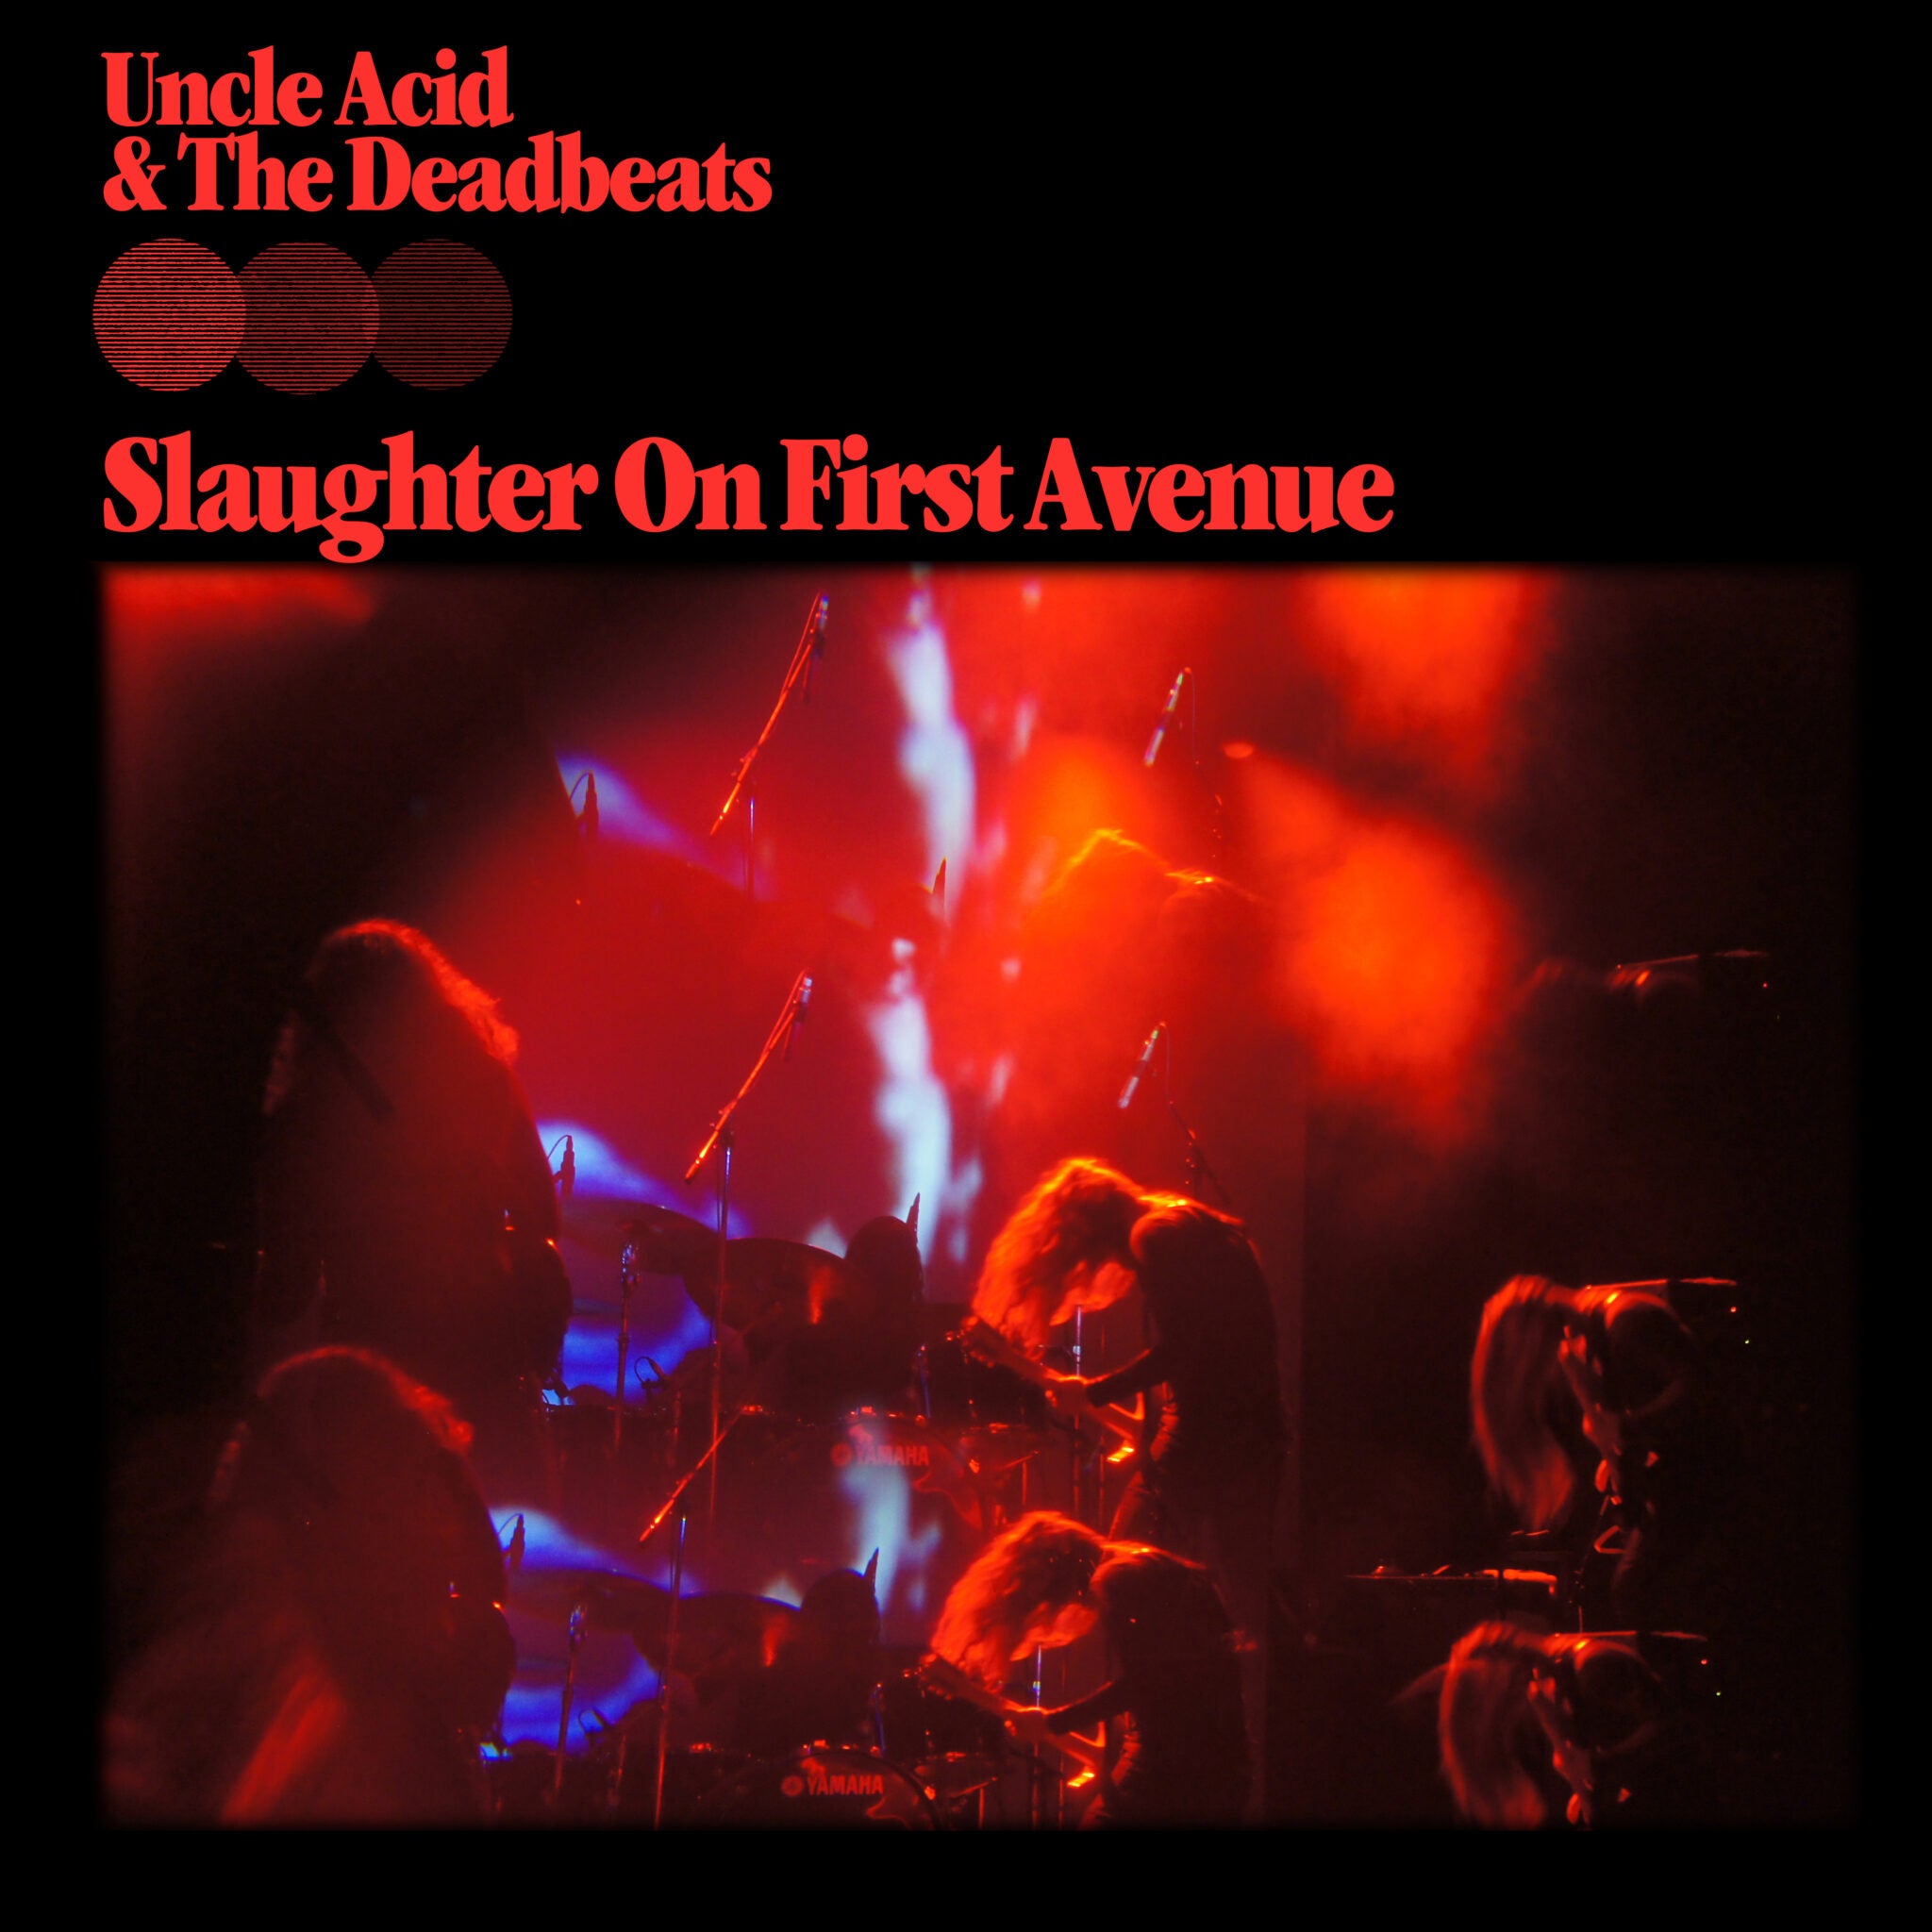 Uncle Acid & The Deadbeats “Slaughter On First Avenue"